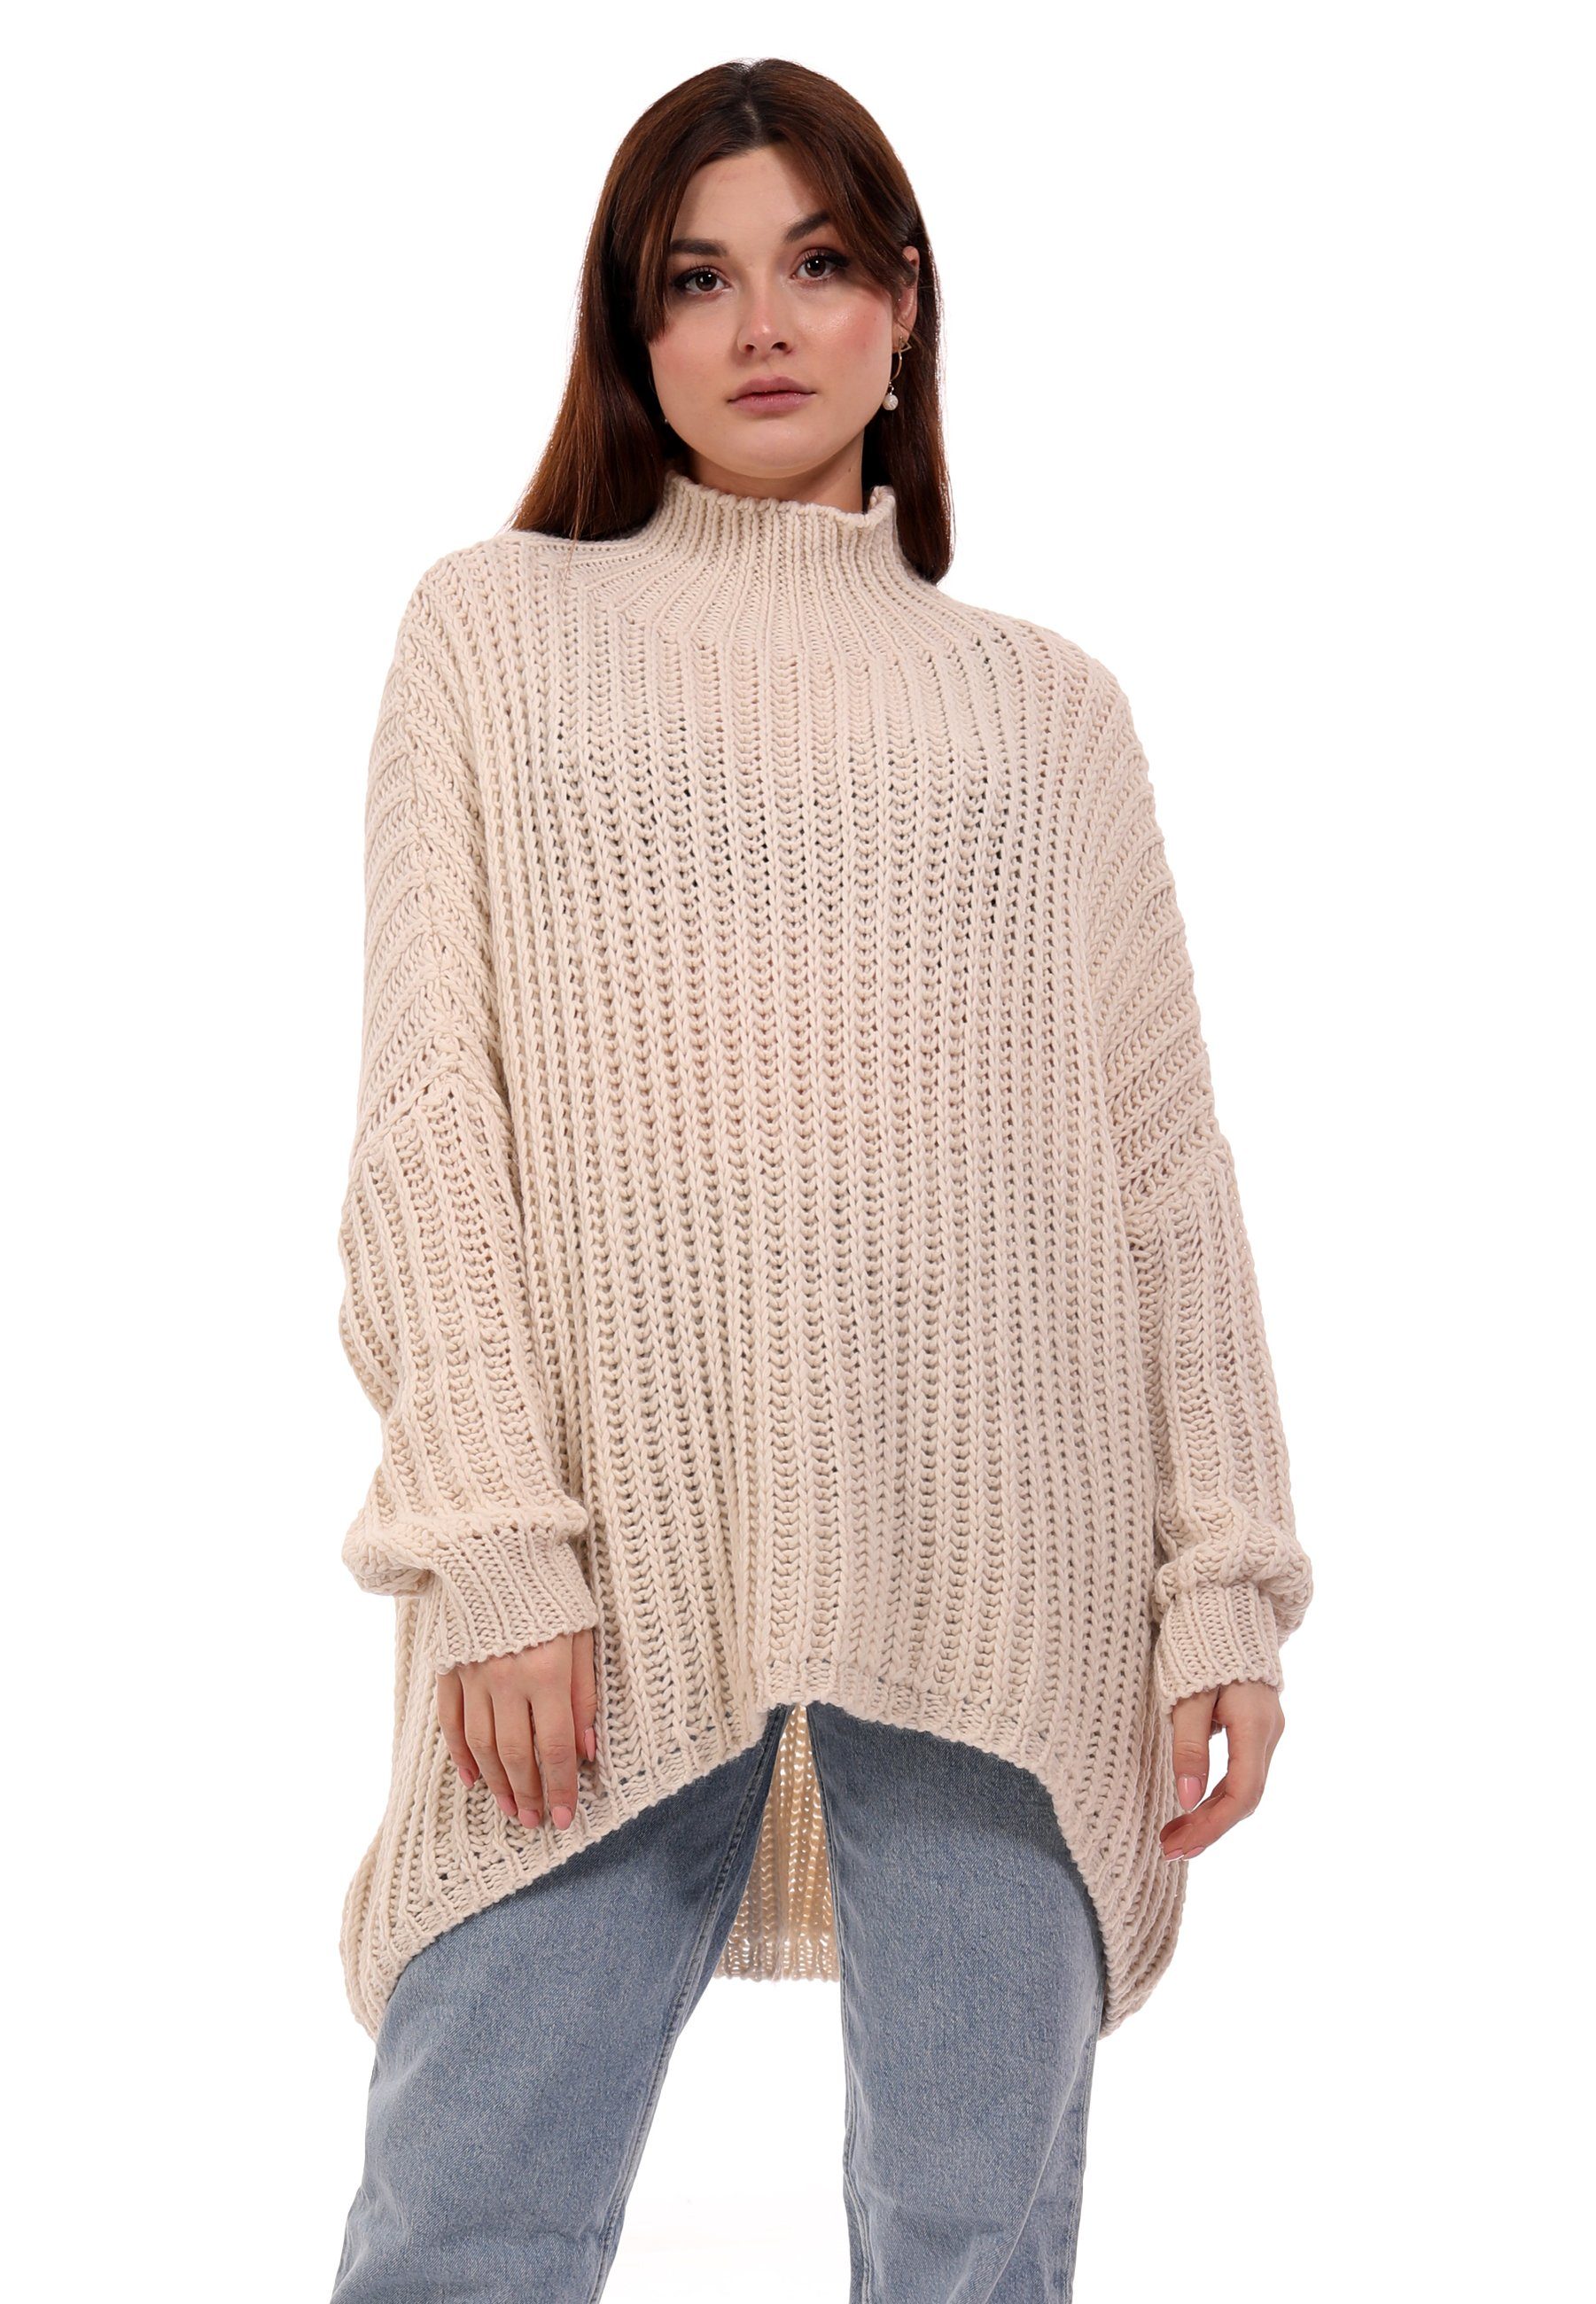 YC Fashion & Style Longpullover Oversized Pullover Grobstrick Vokuhila Sweater One Size (1-tlg) casual wollweiß